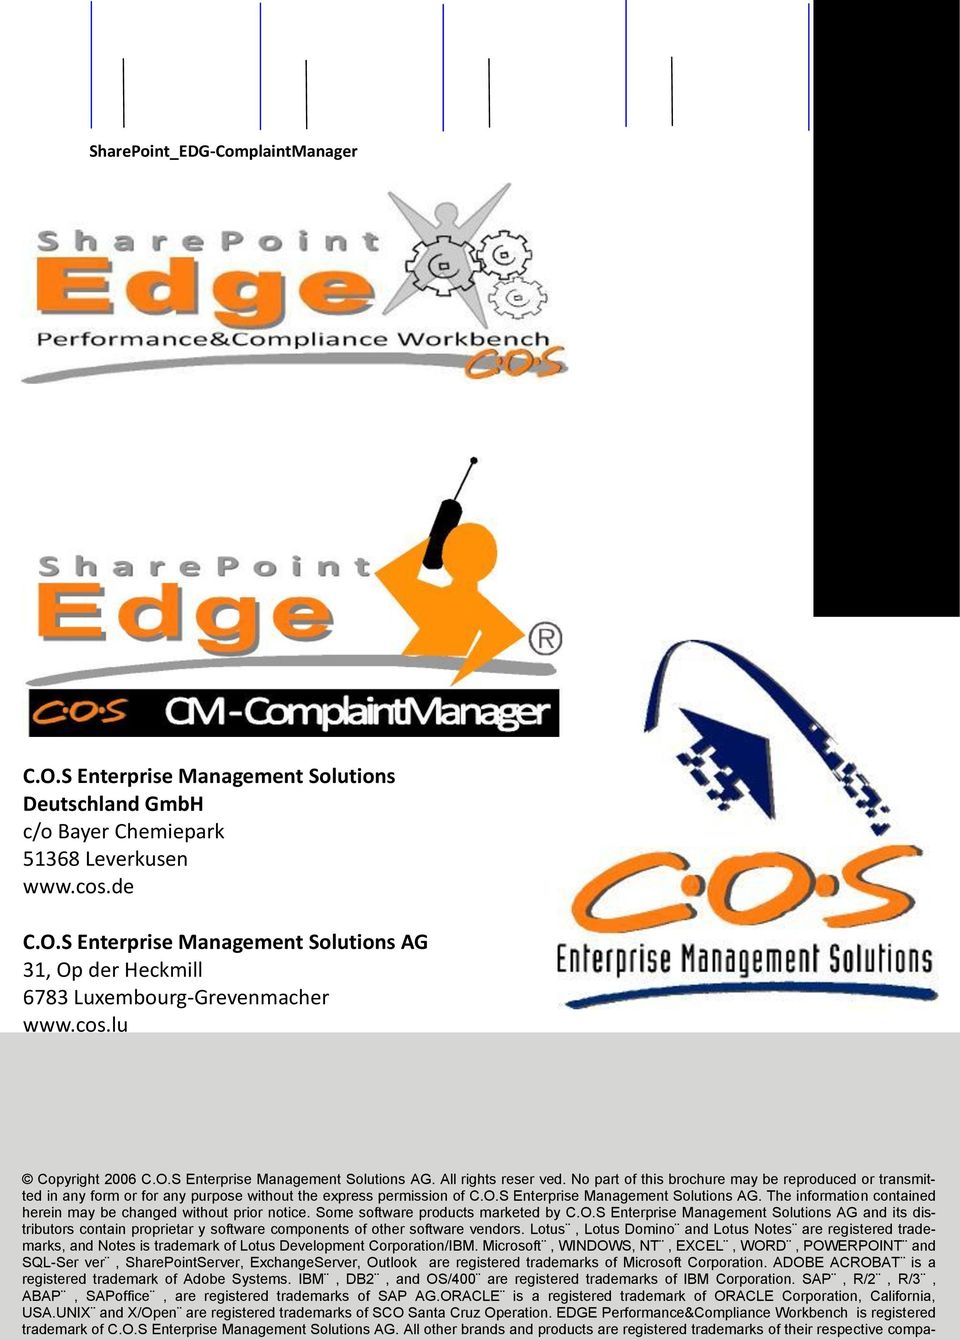 No part of this brochure may be reproduced or transmitted in any form or for any purpose without the express permission of C.O.S Enterprise Management Solutions AG.